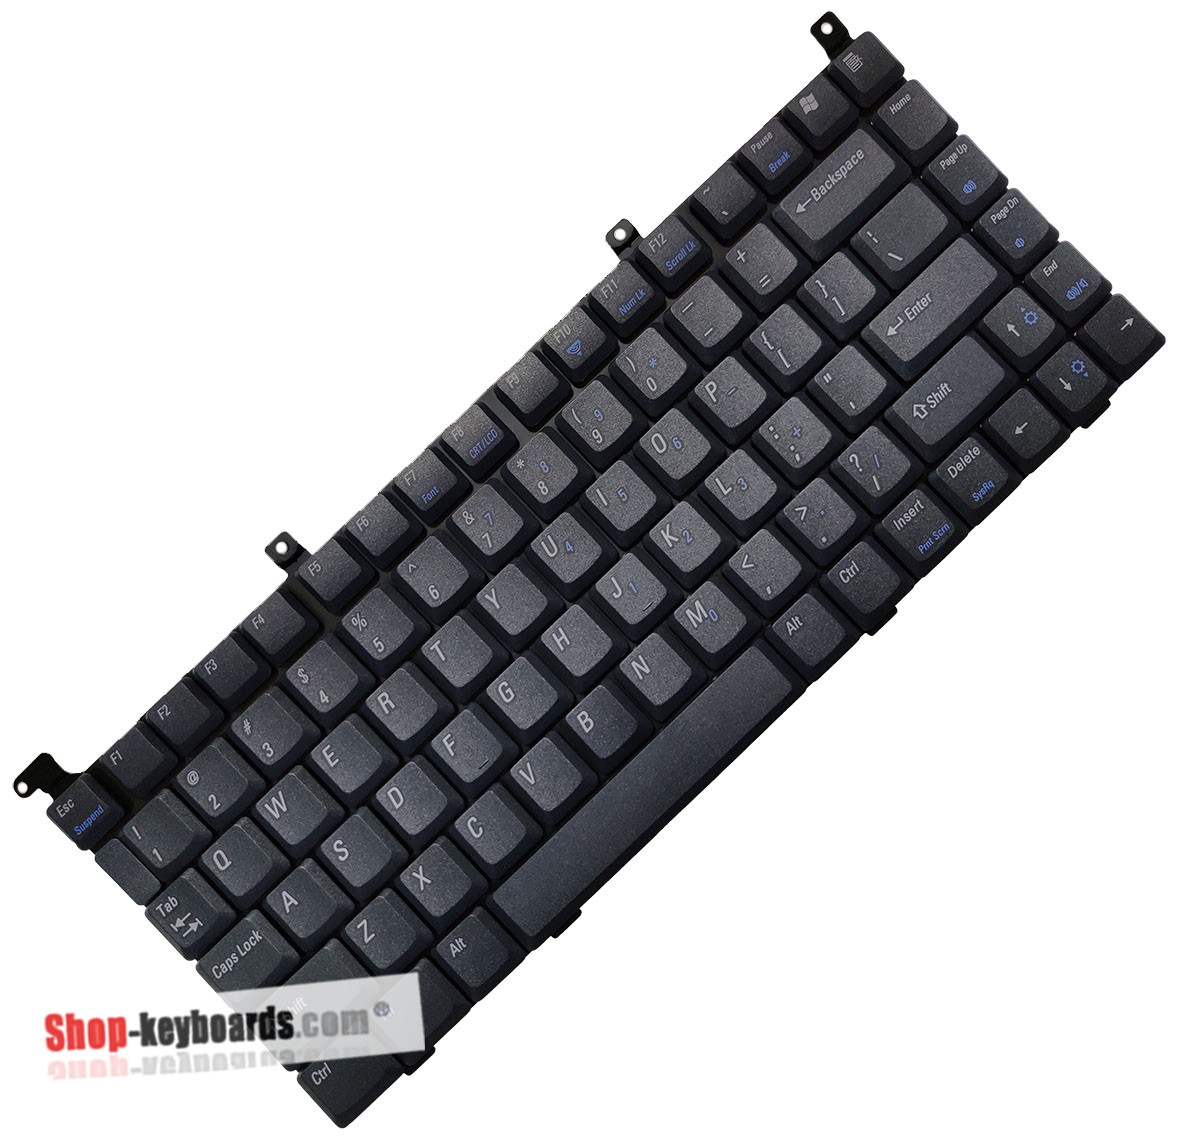 Dell Inspiron 1100 Keyboard replacement